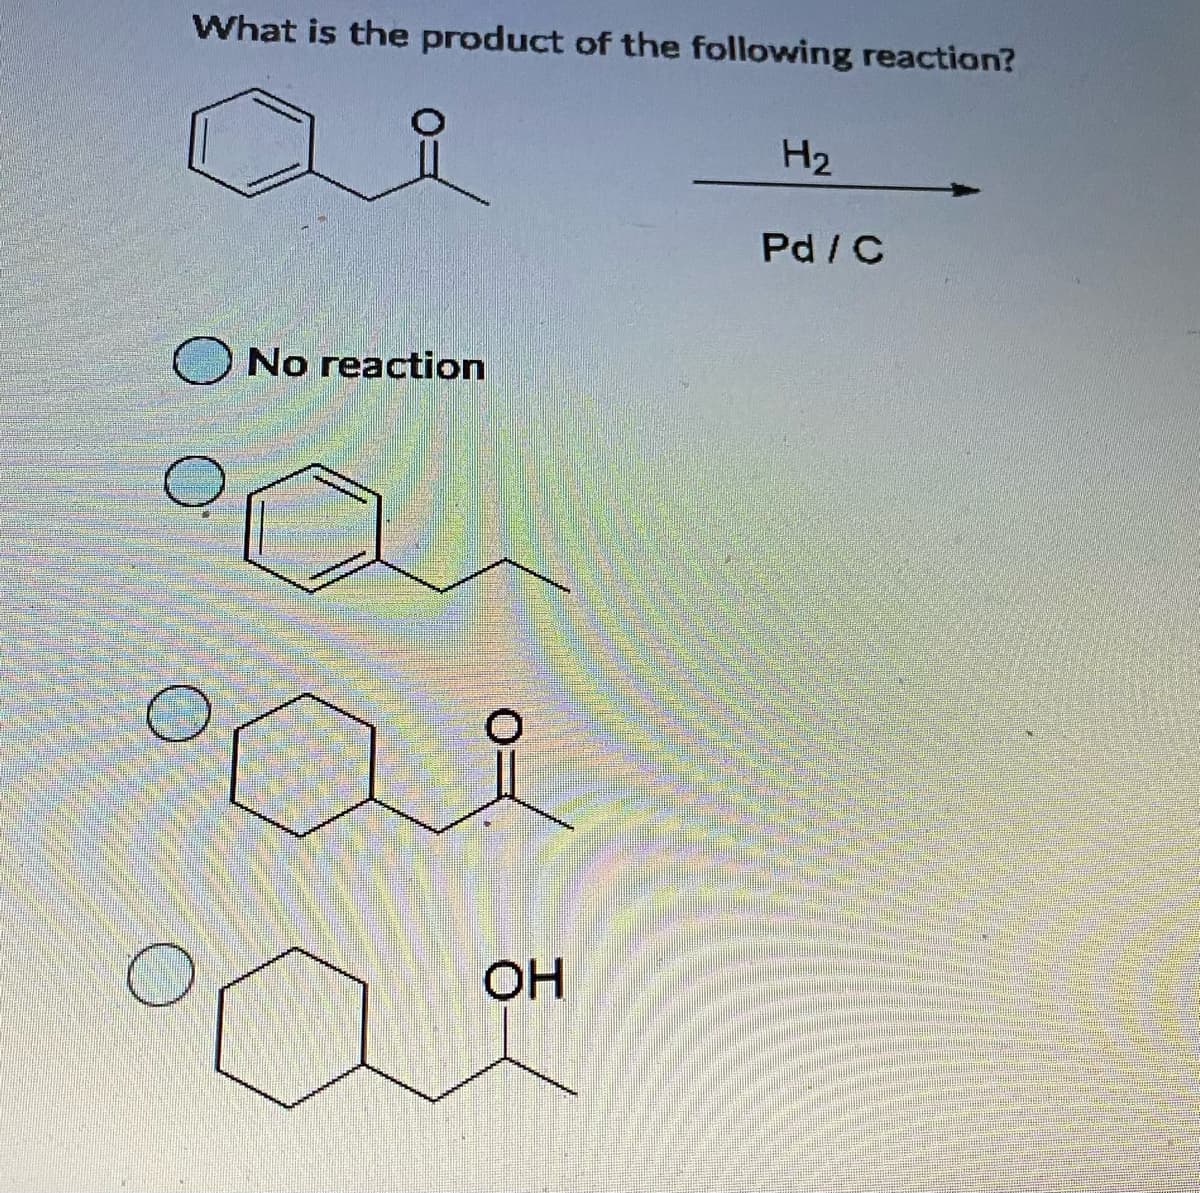 What is the product of the following reaction?
H2
Pd/C
No reaction
OH
